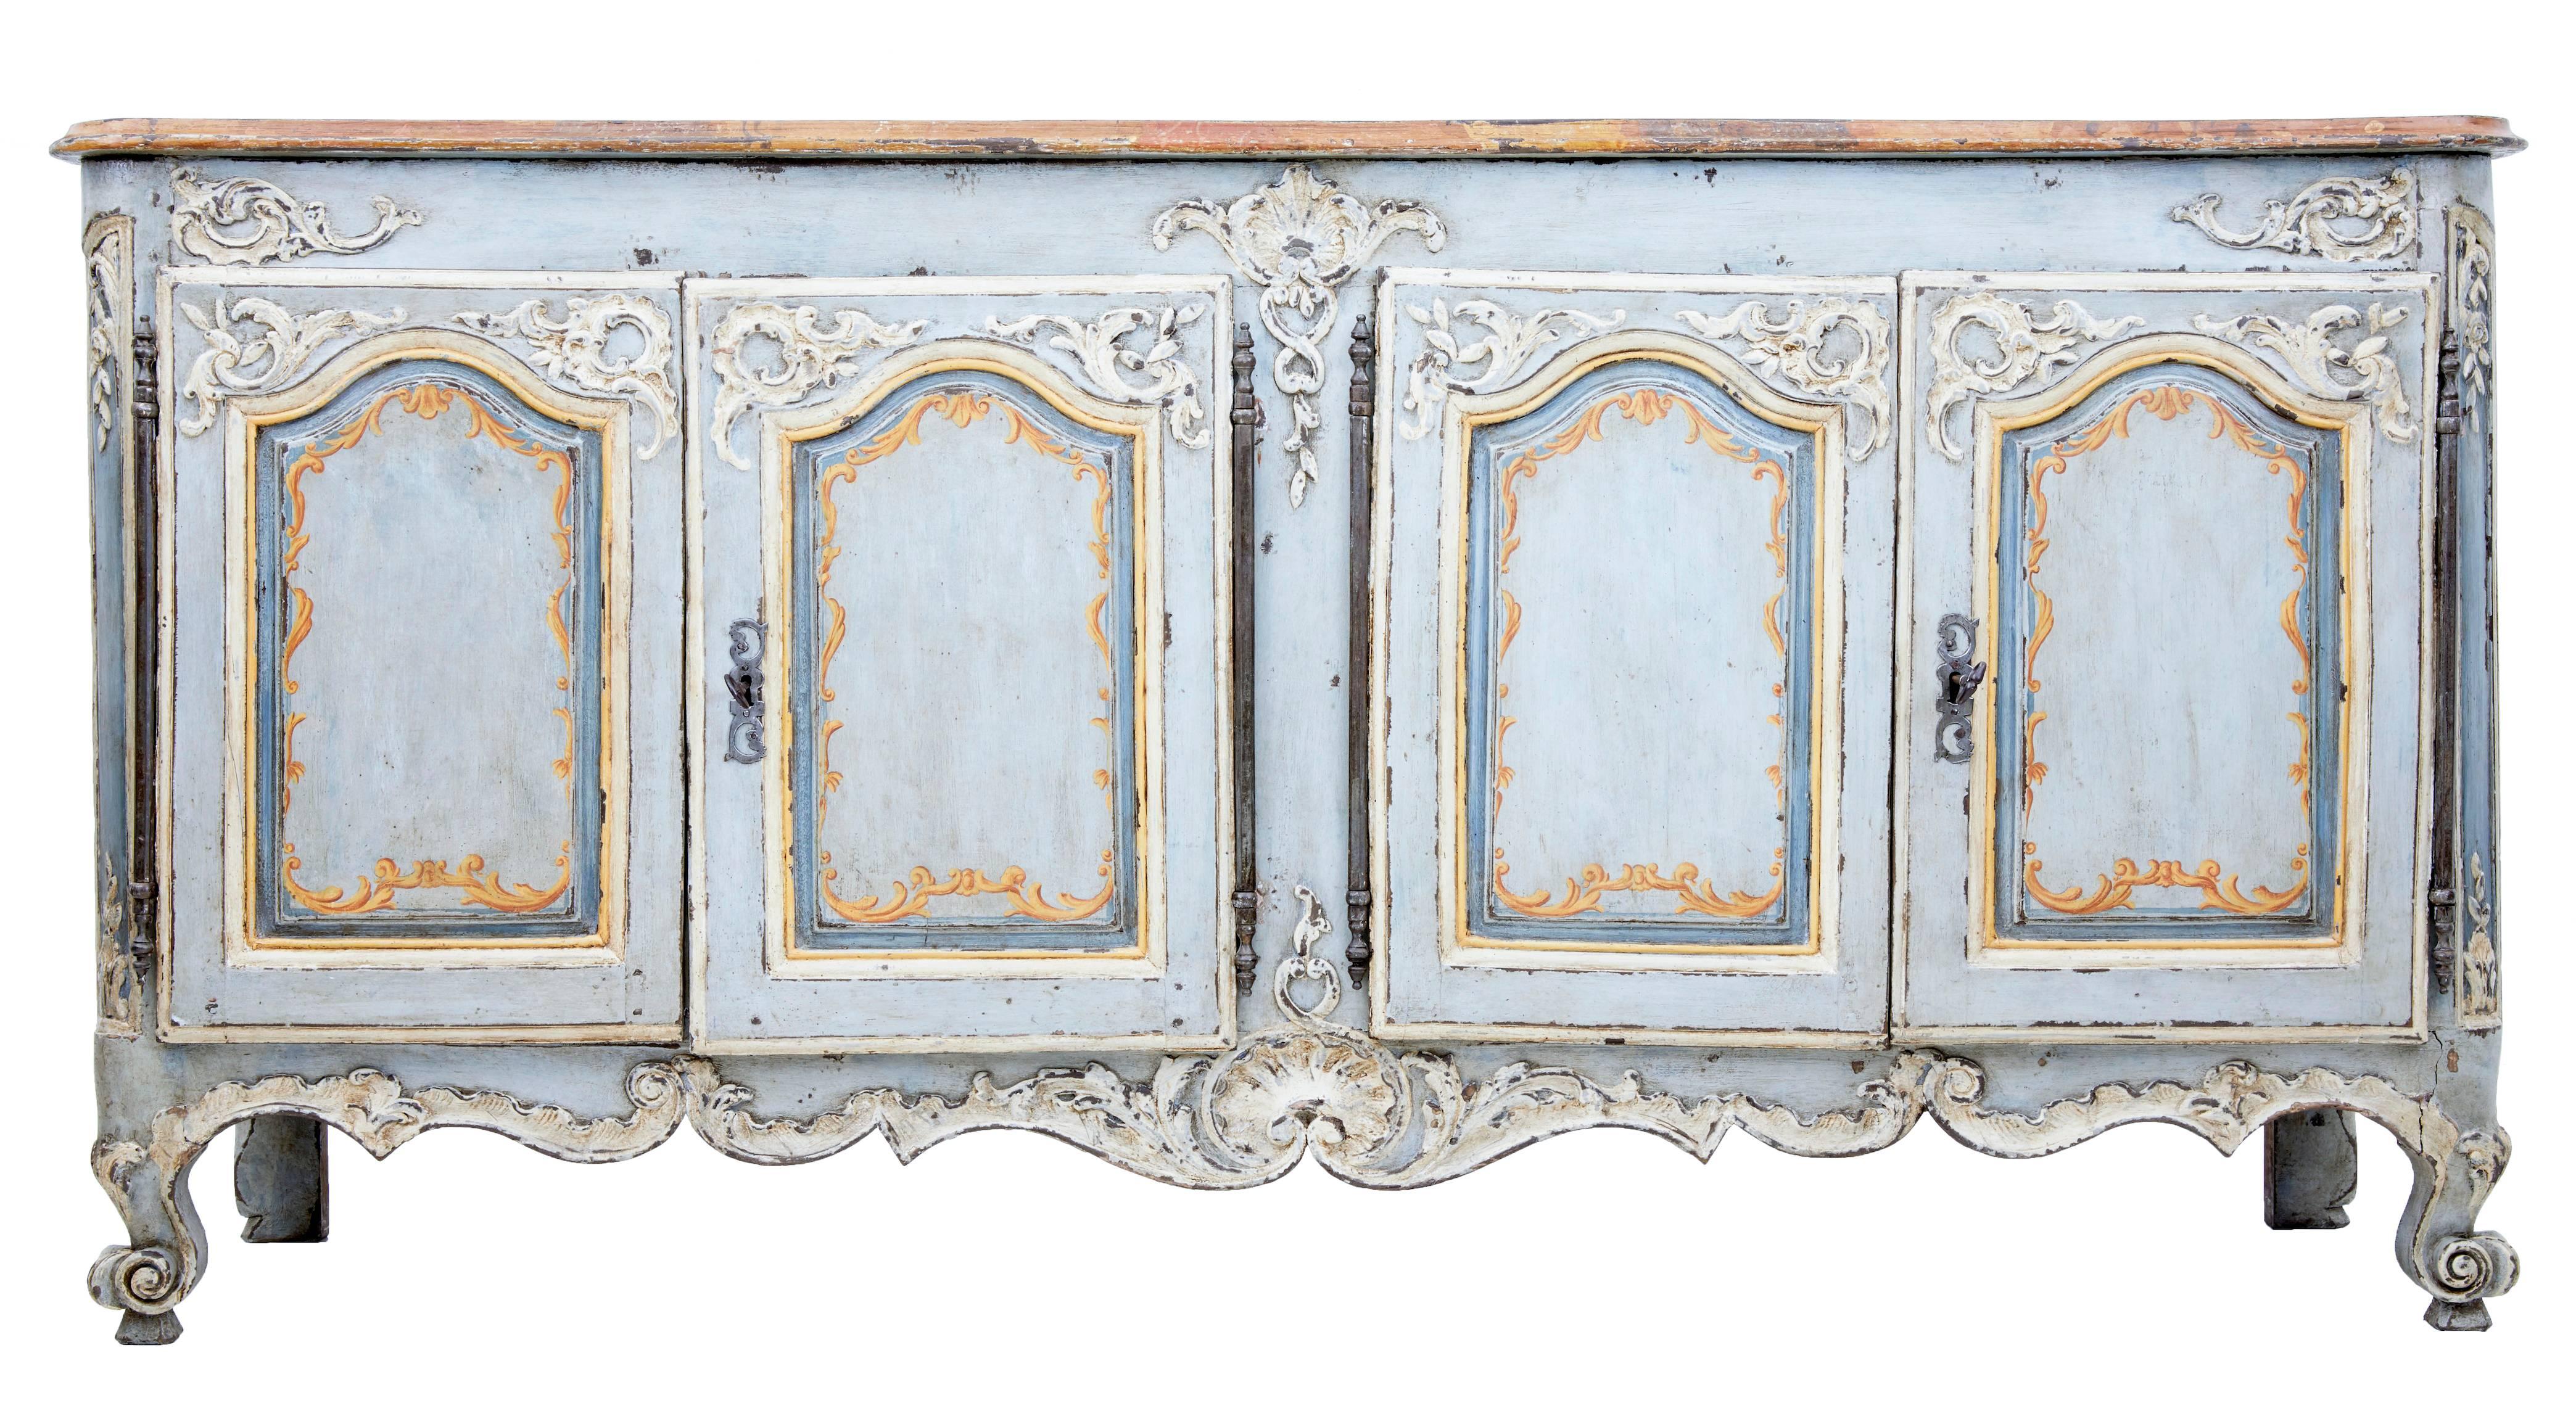 Beautifully decorated French oak dresser base, circa 1770.
Original paint with later orange florals on the doors, carving painted in white to contrast with the base colour.
Stumbled top with painted florals and swags in the centre.
Double doors